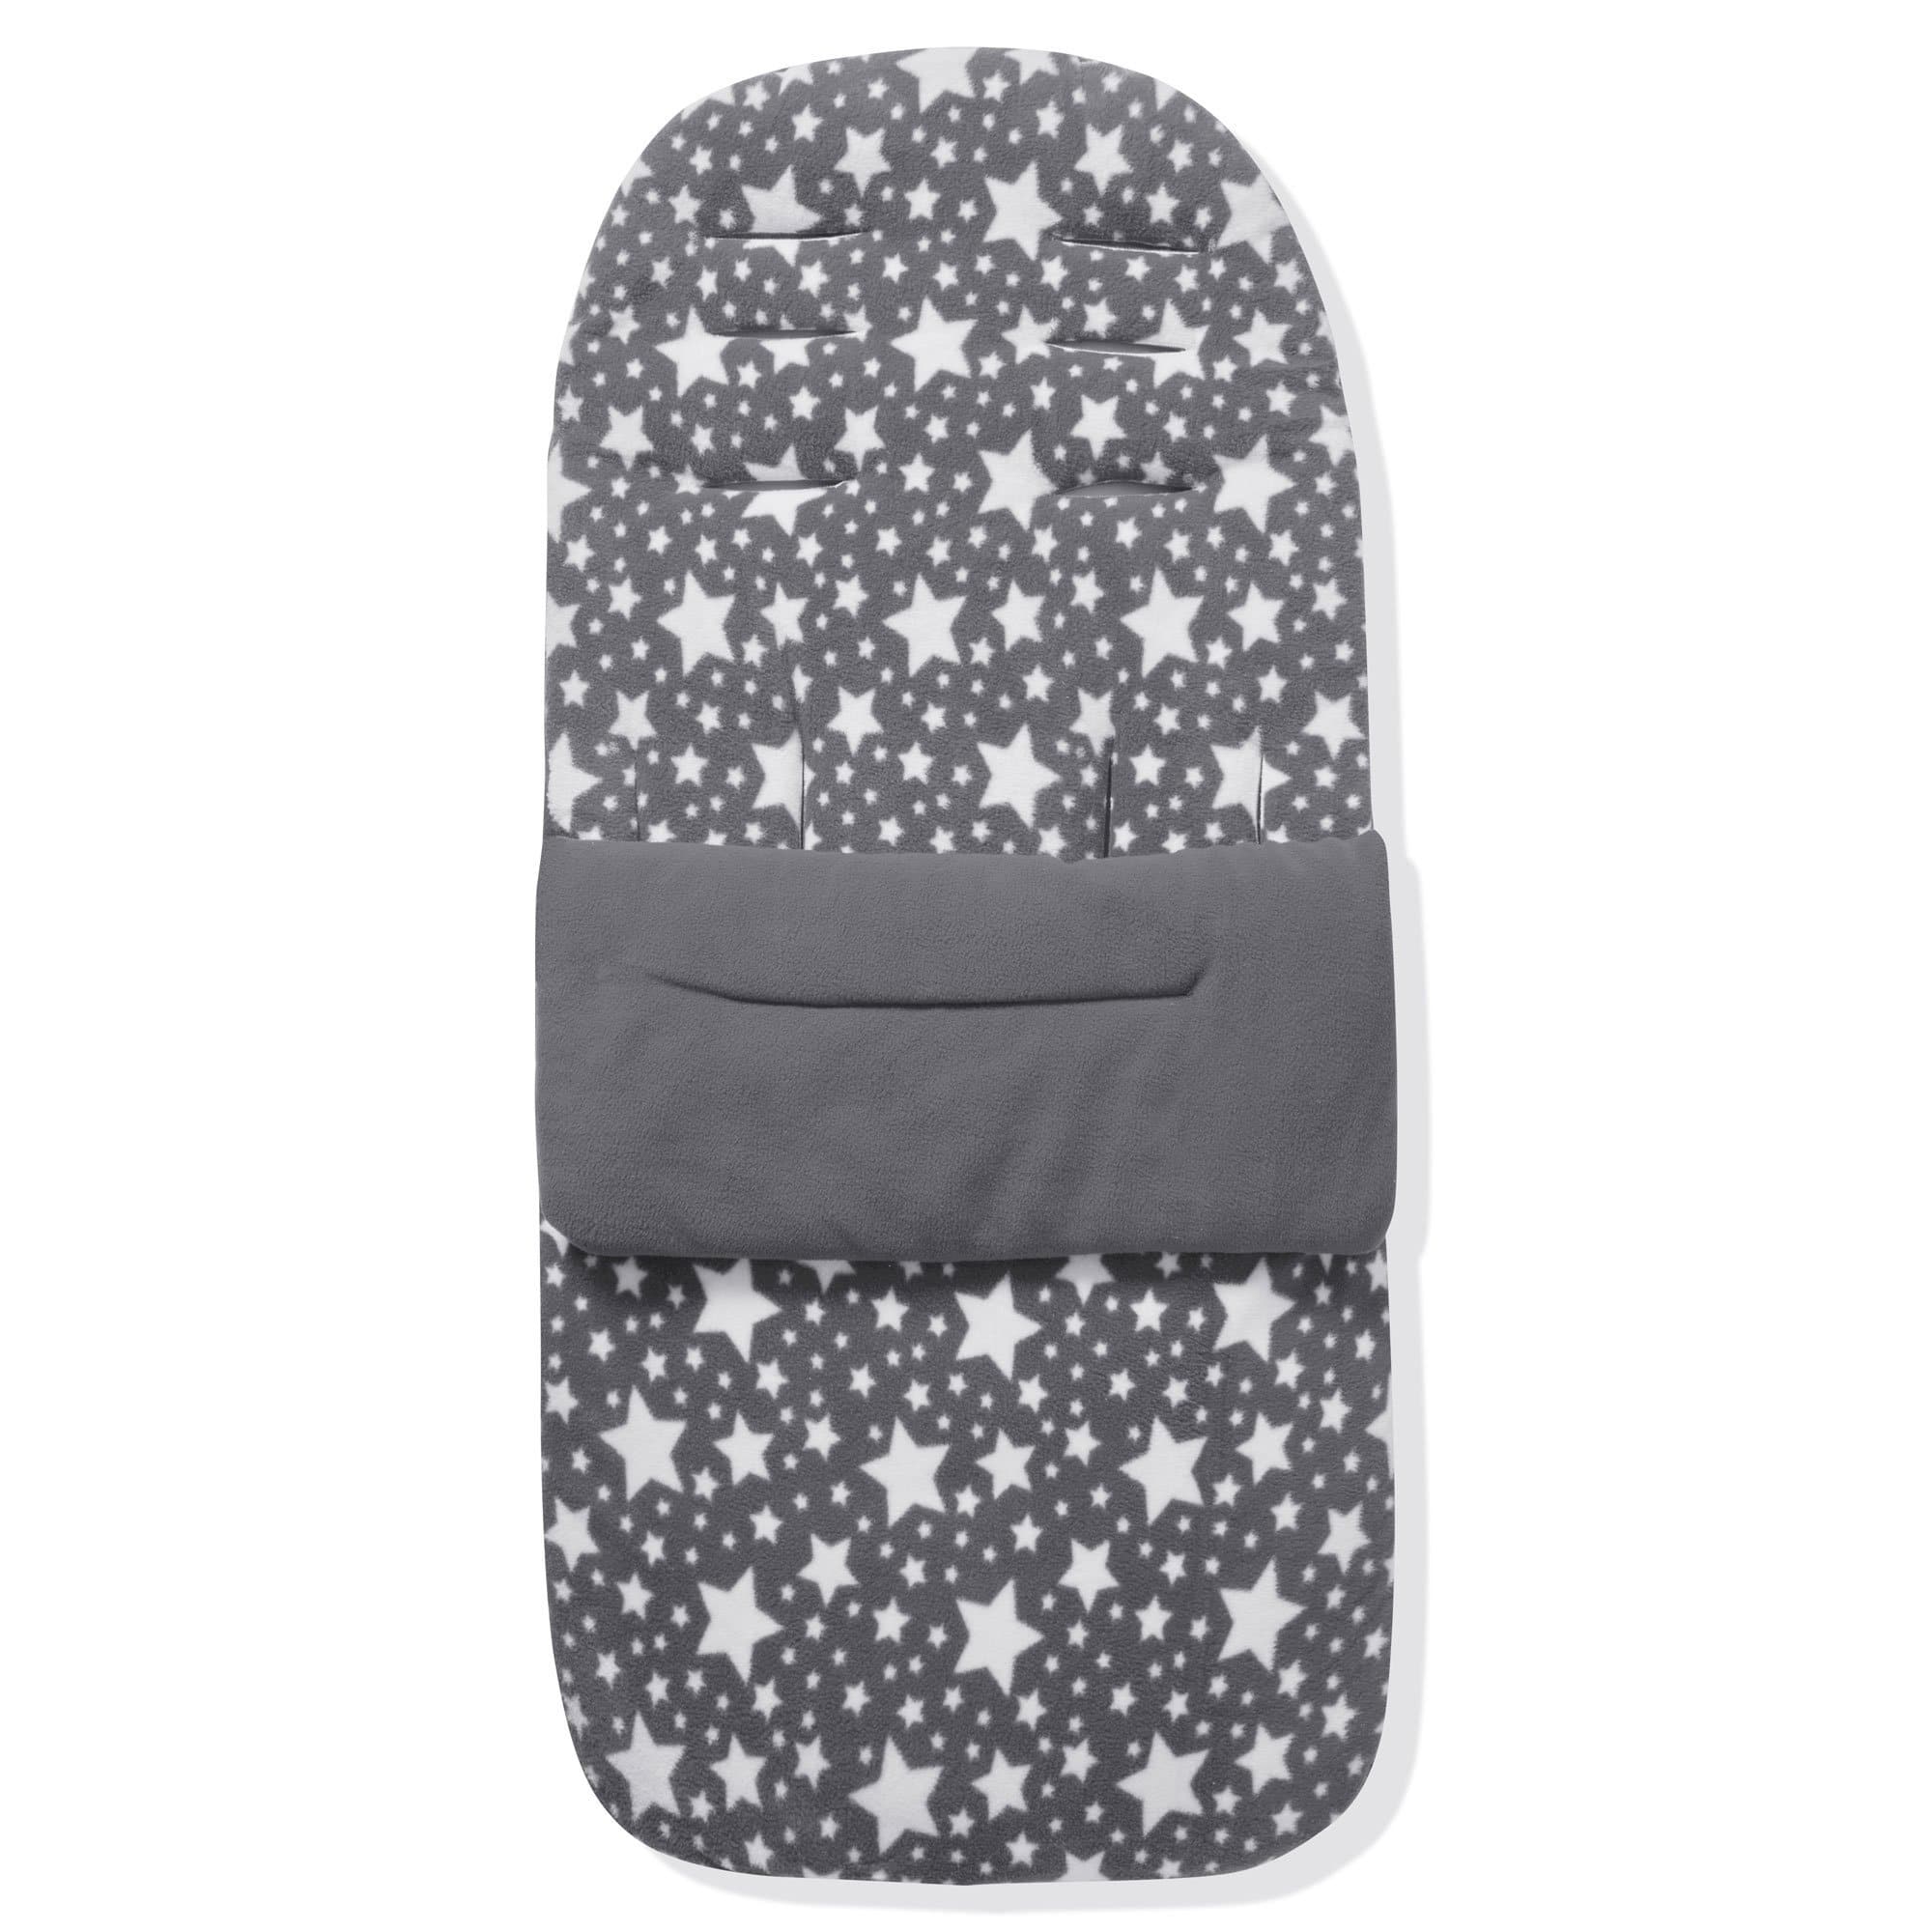 Fleece Footmuff / Cosy Toes Compatible with Unilove - Grey Star / Fits All Models | For Your Little One